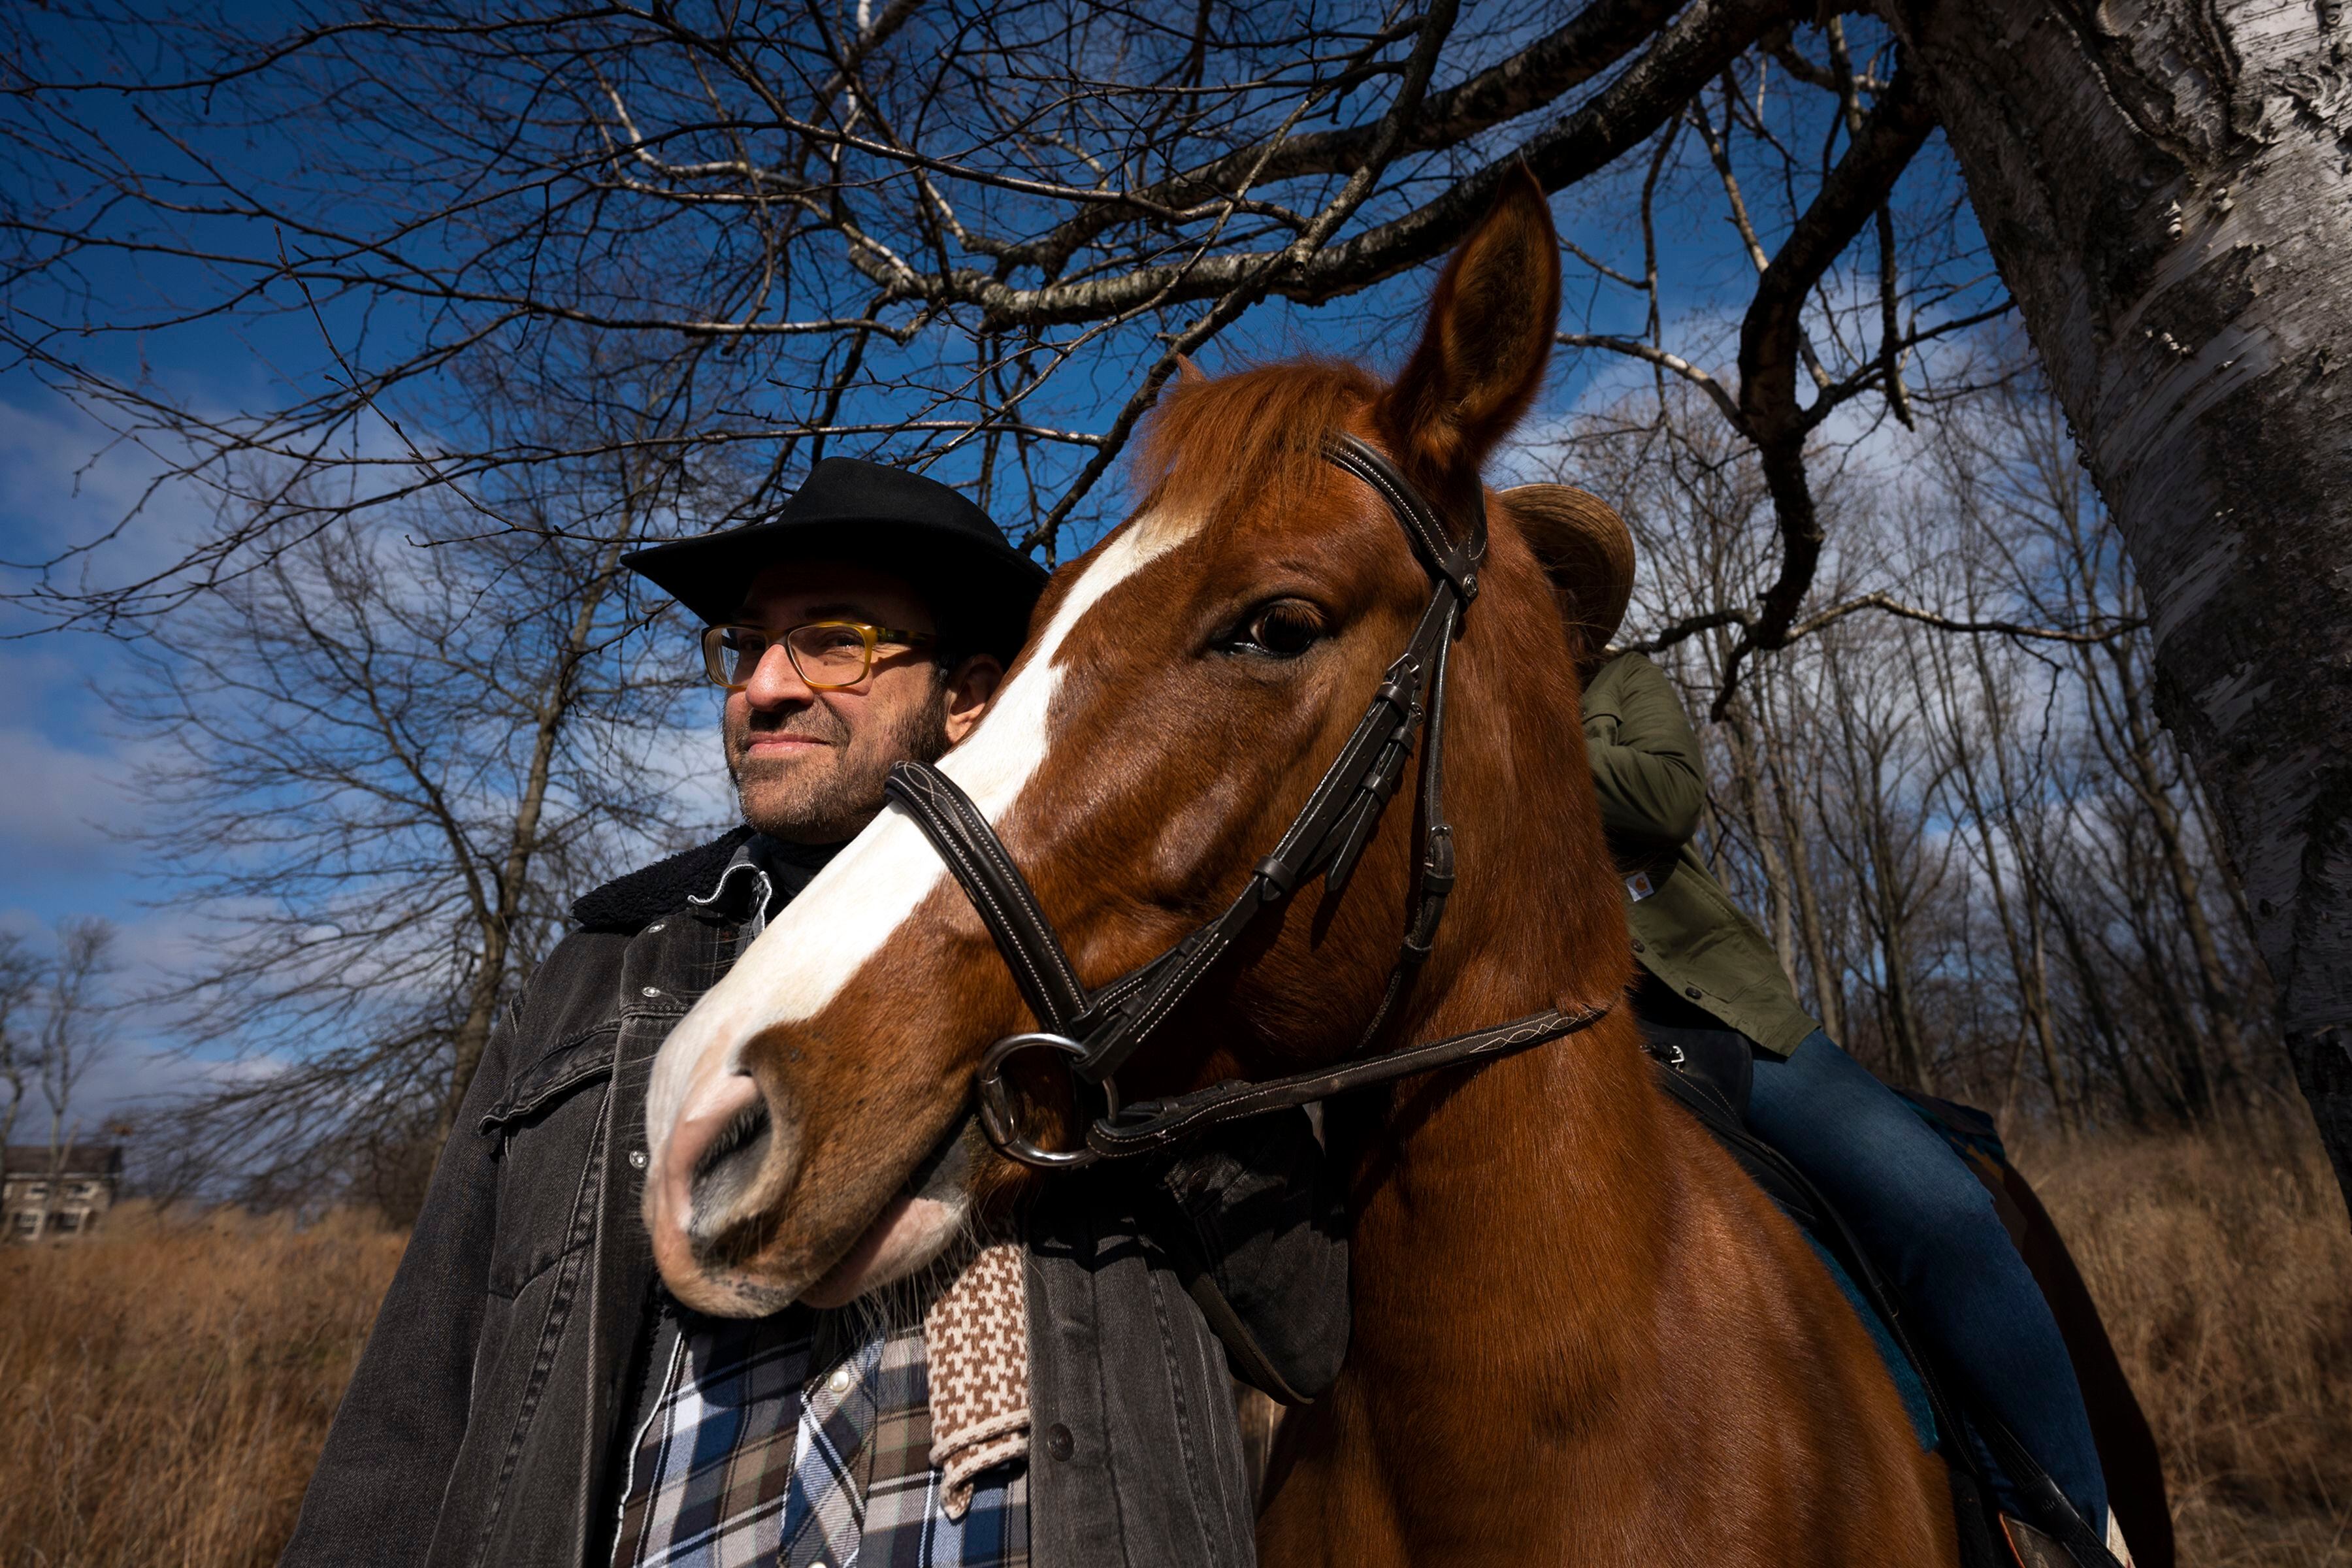 Do 'Cowboy Dreams' come true? Country band John Train's new horse is inspired Philly riding culture